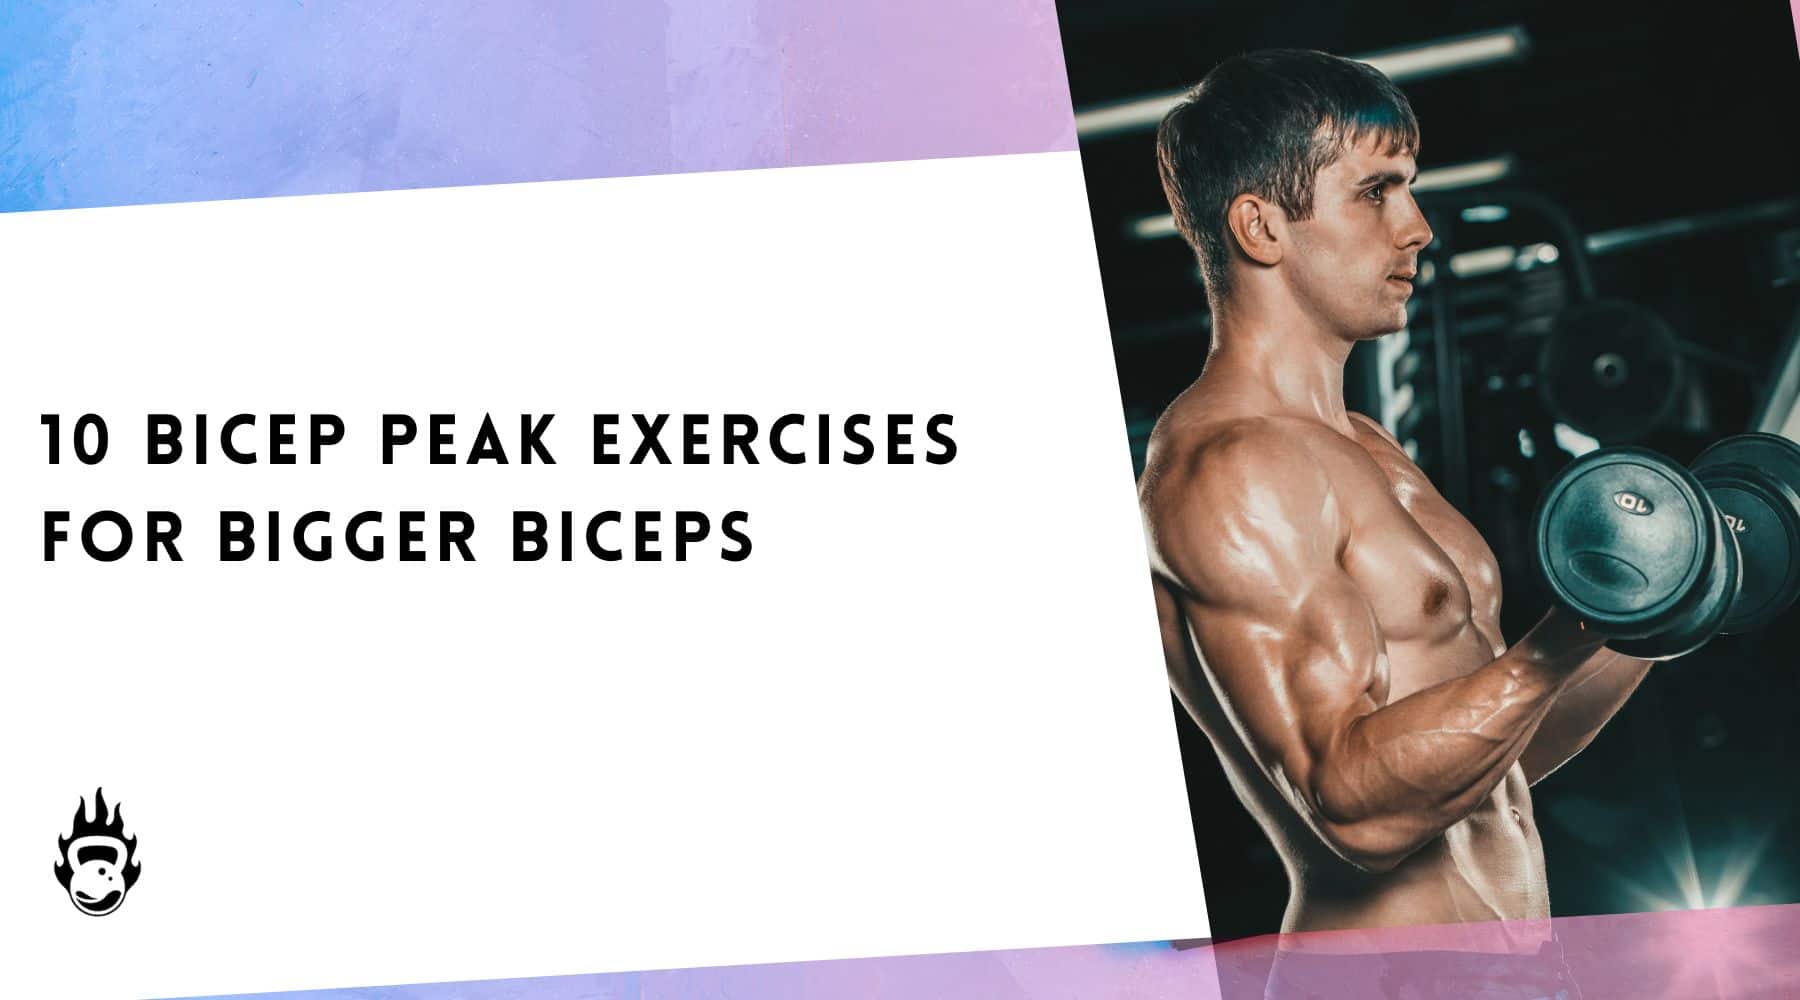 Top 5 Must-Try Cable Biceps Exercises For Size And Definition